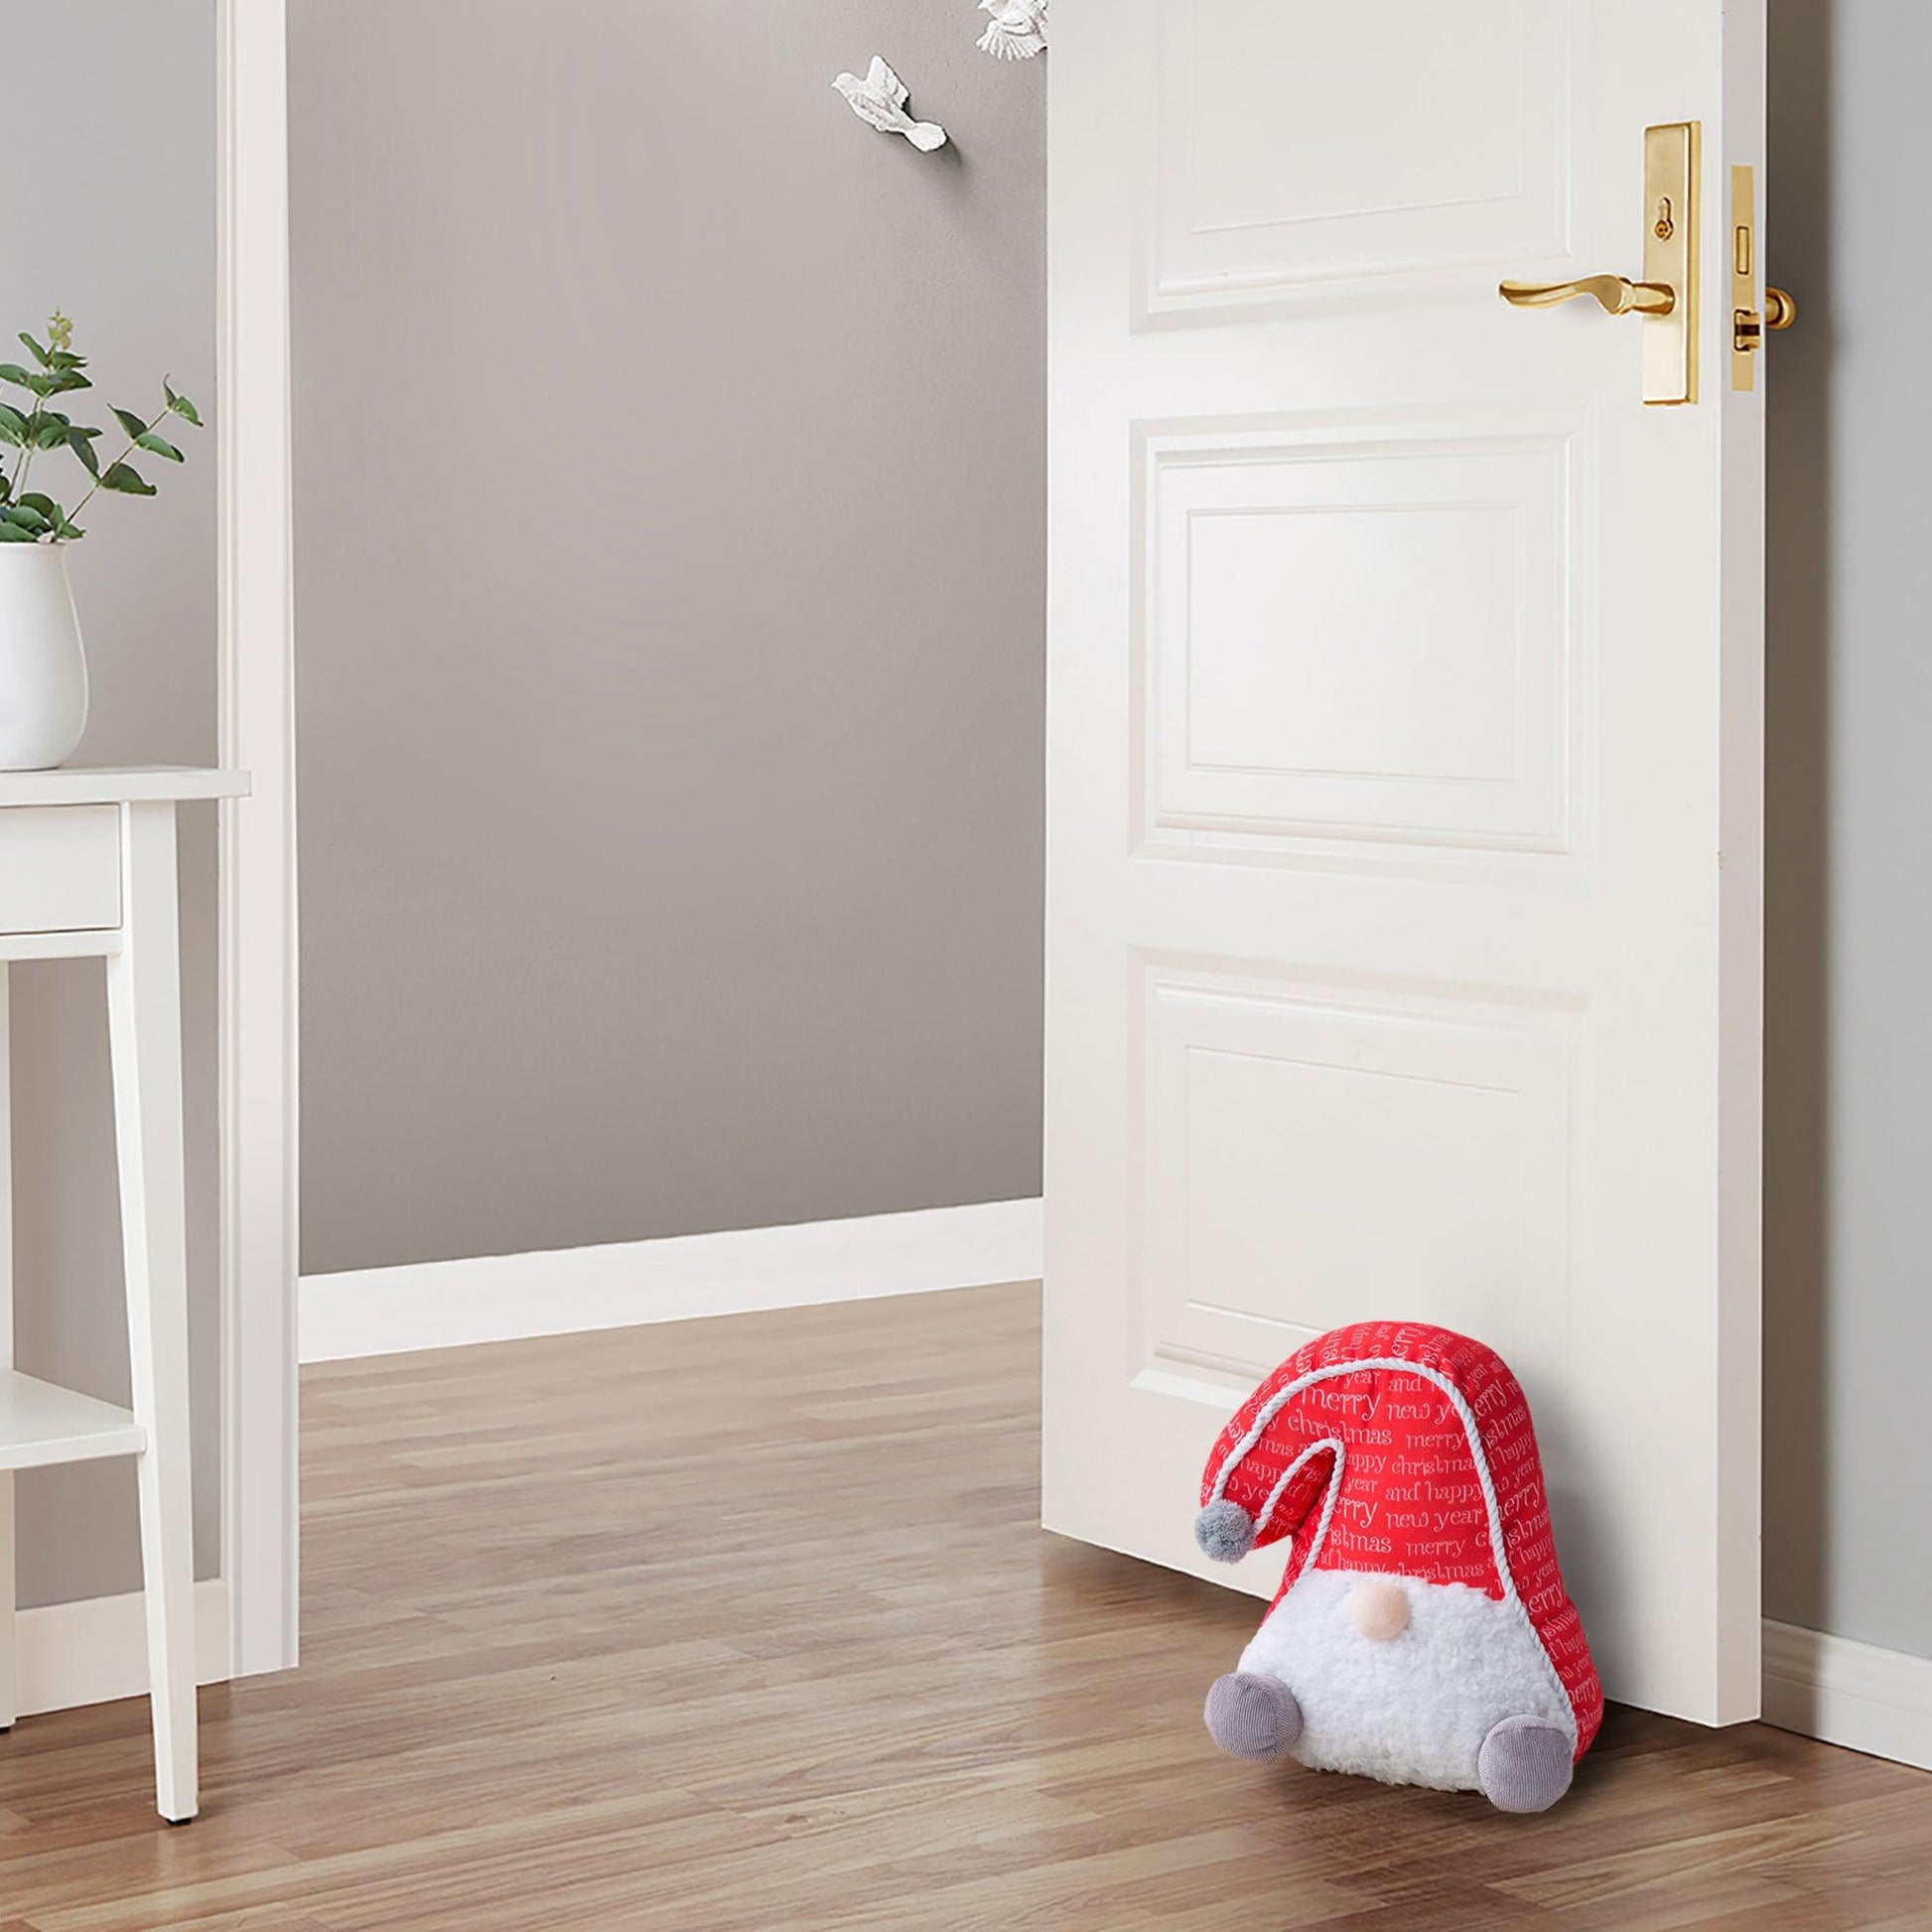 Stewie the Gnome LED Door Stopper - The Draft Stop